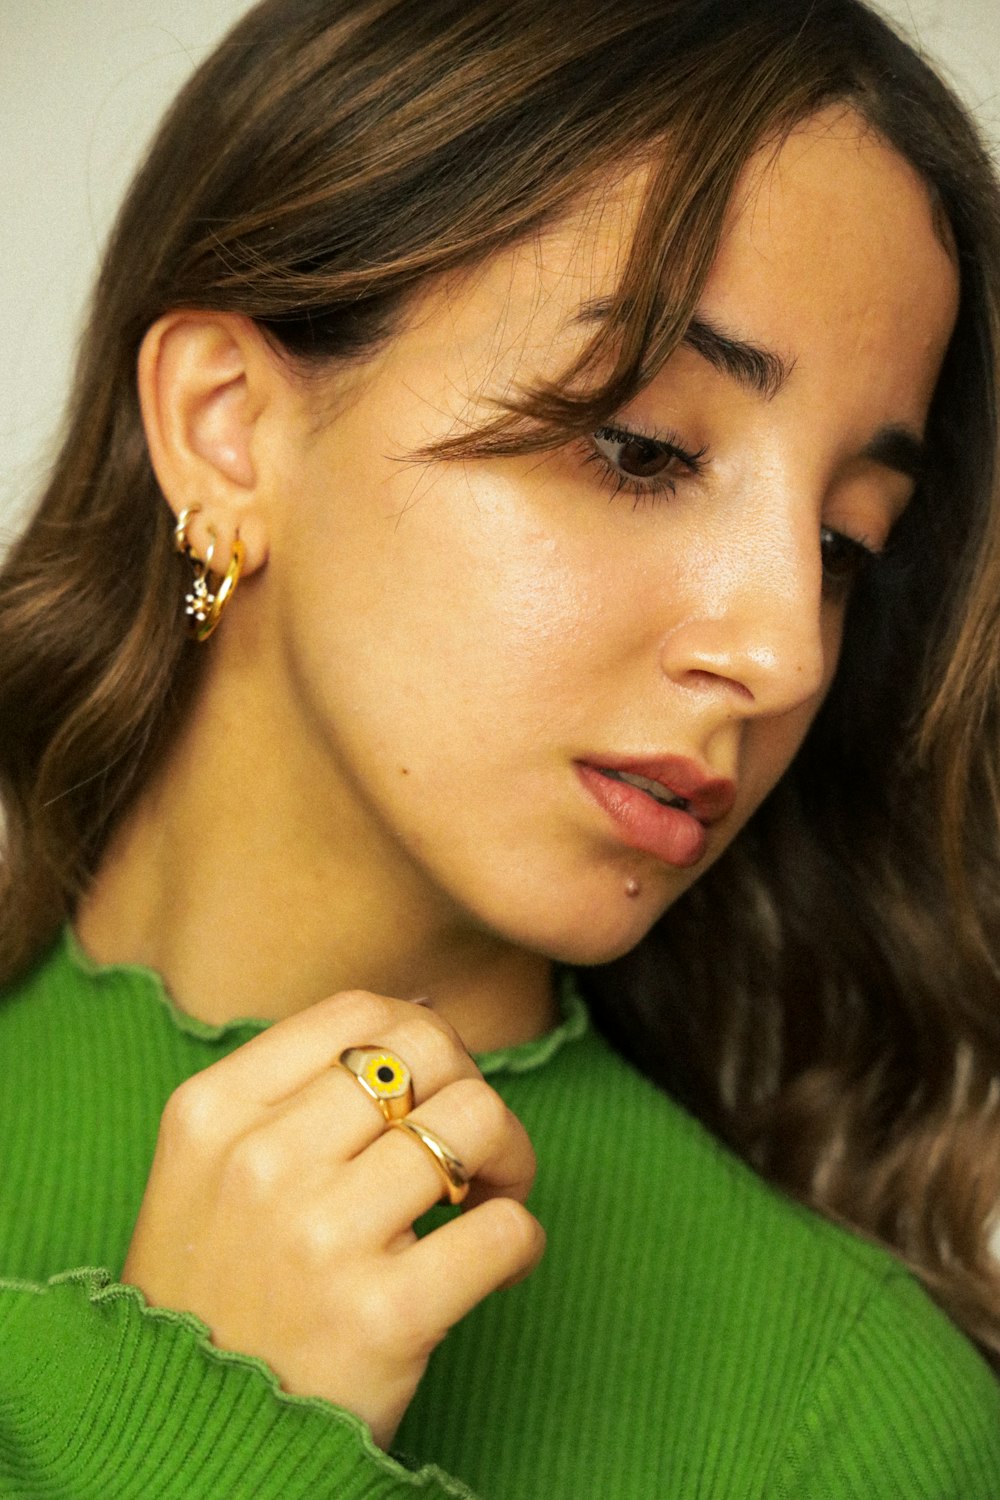 a woman wearing a green sweater and a pair of earrings